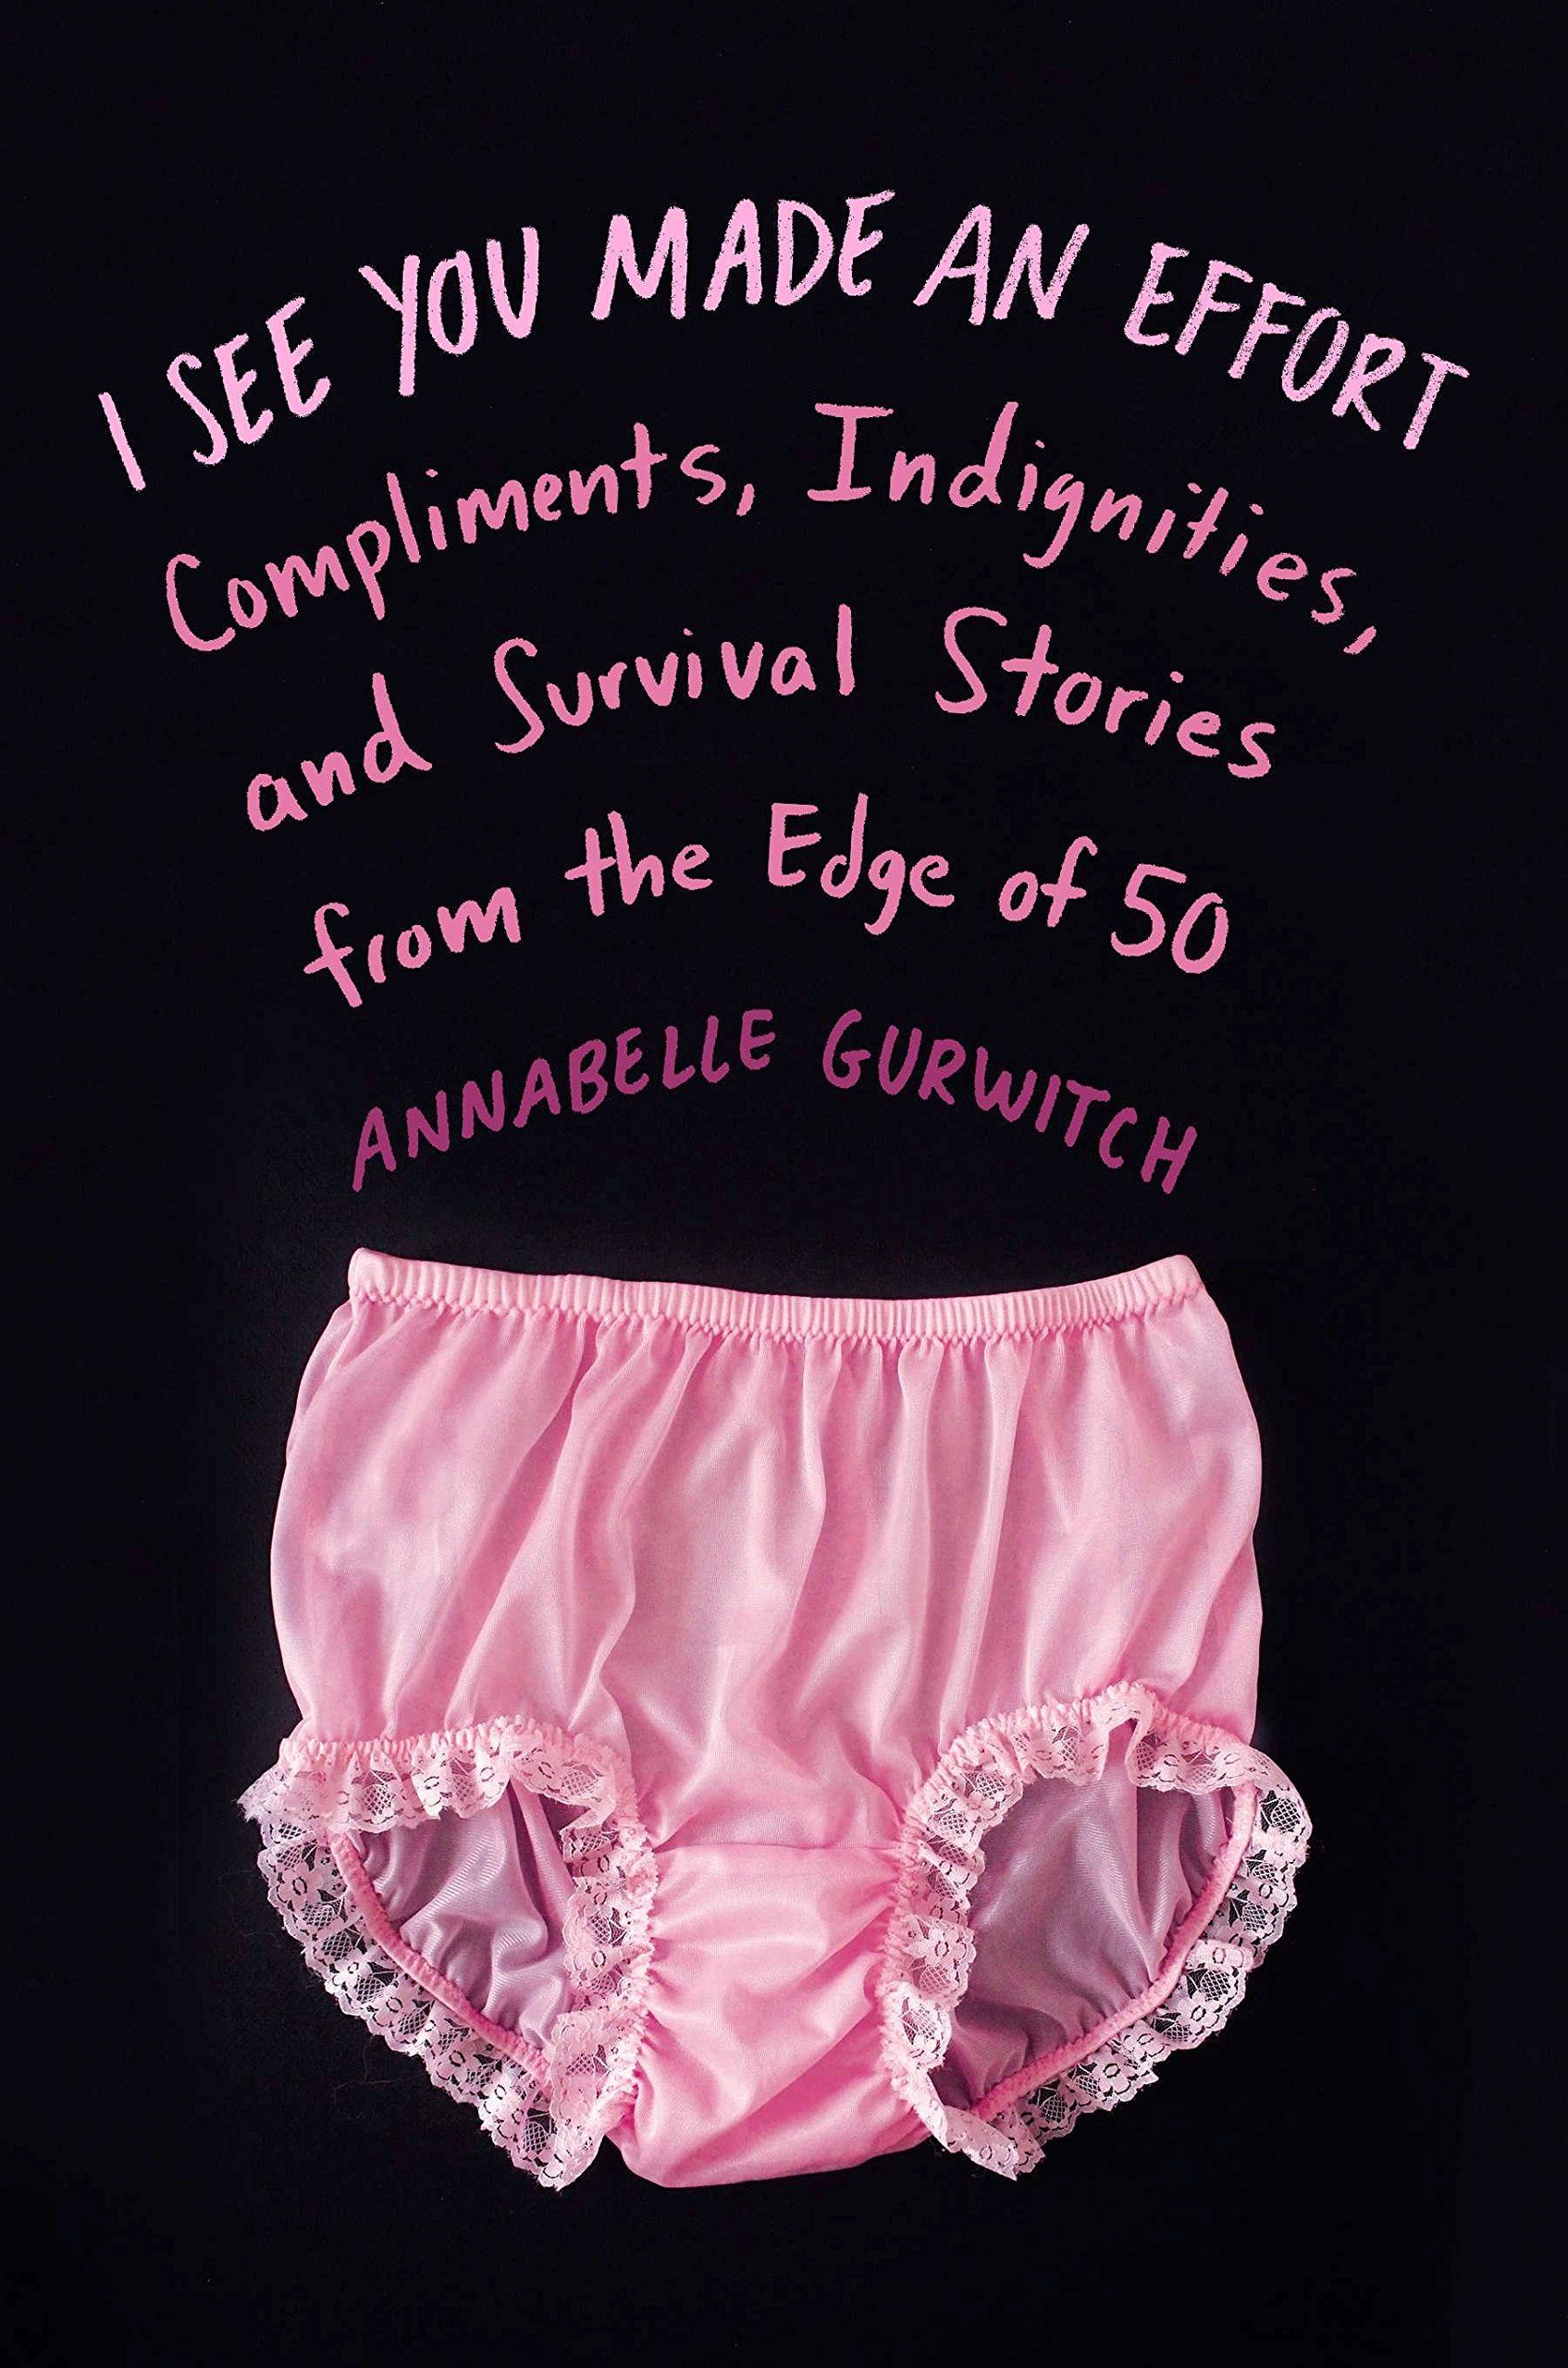 I See You Made an Effort by Annabelle Gurwitch - book cover